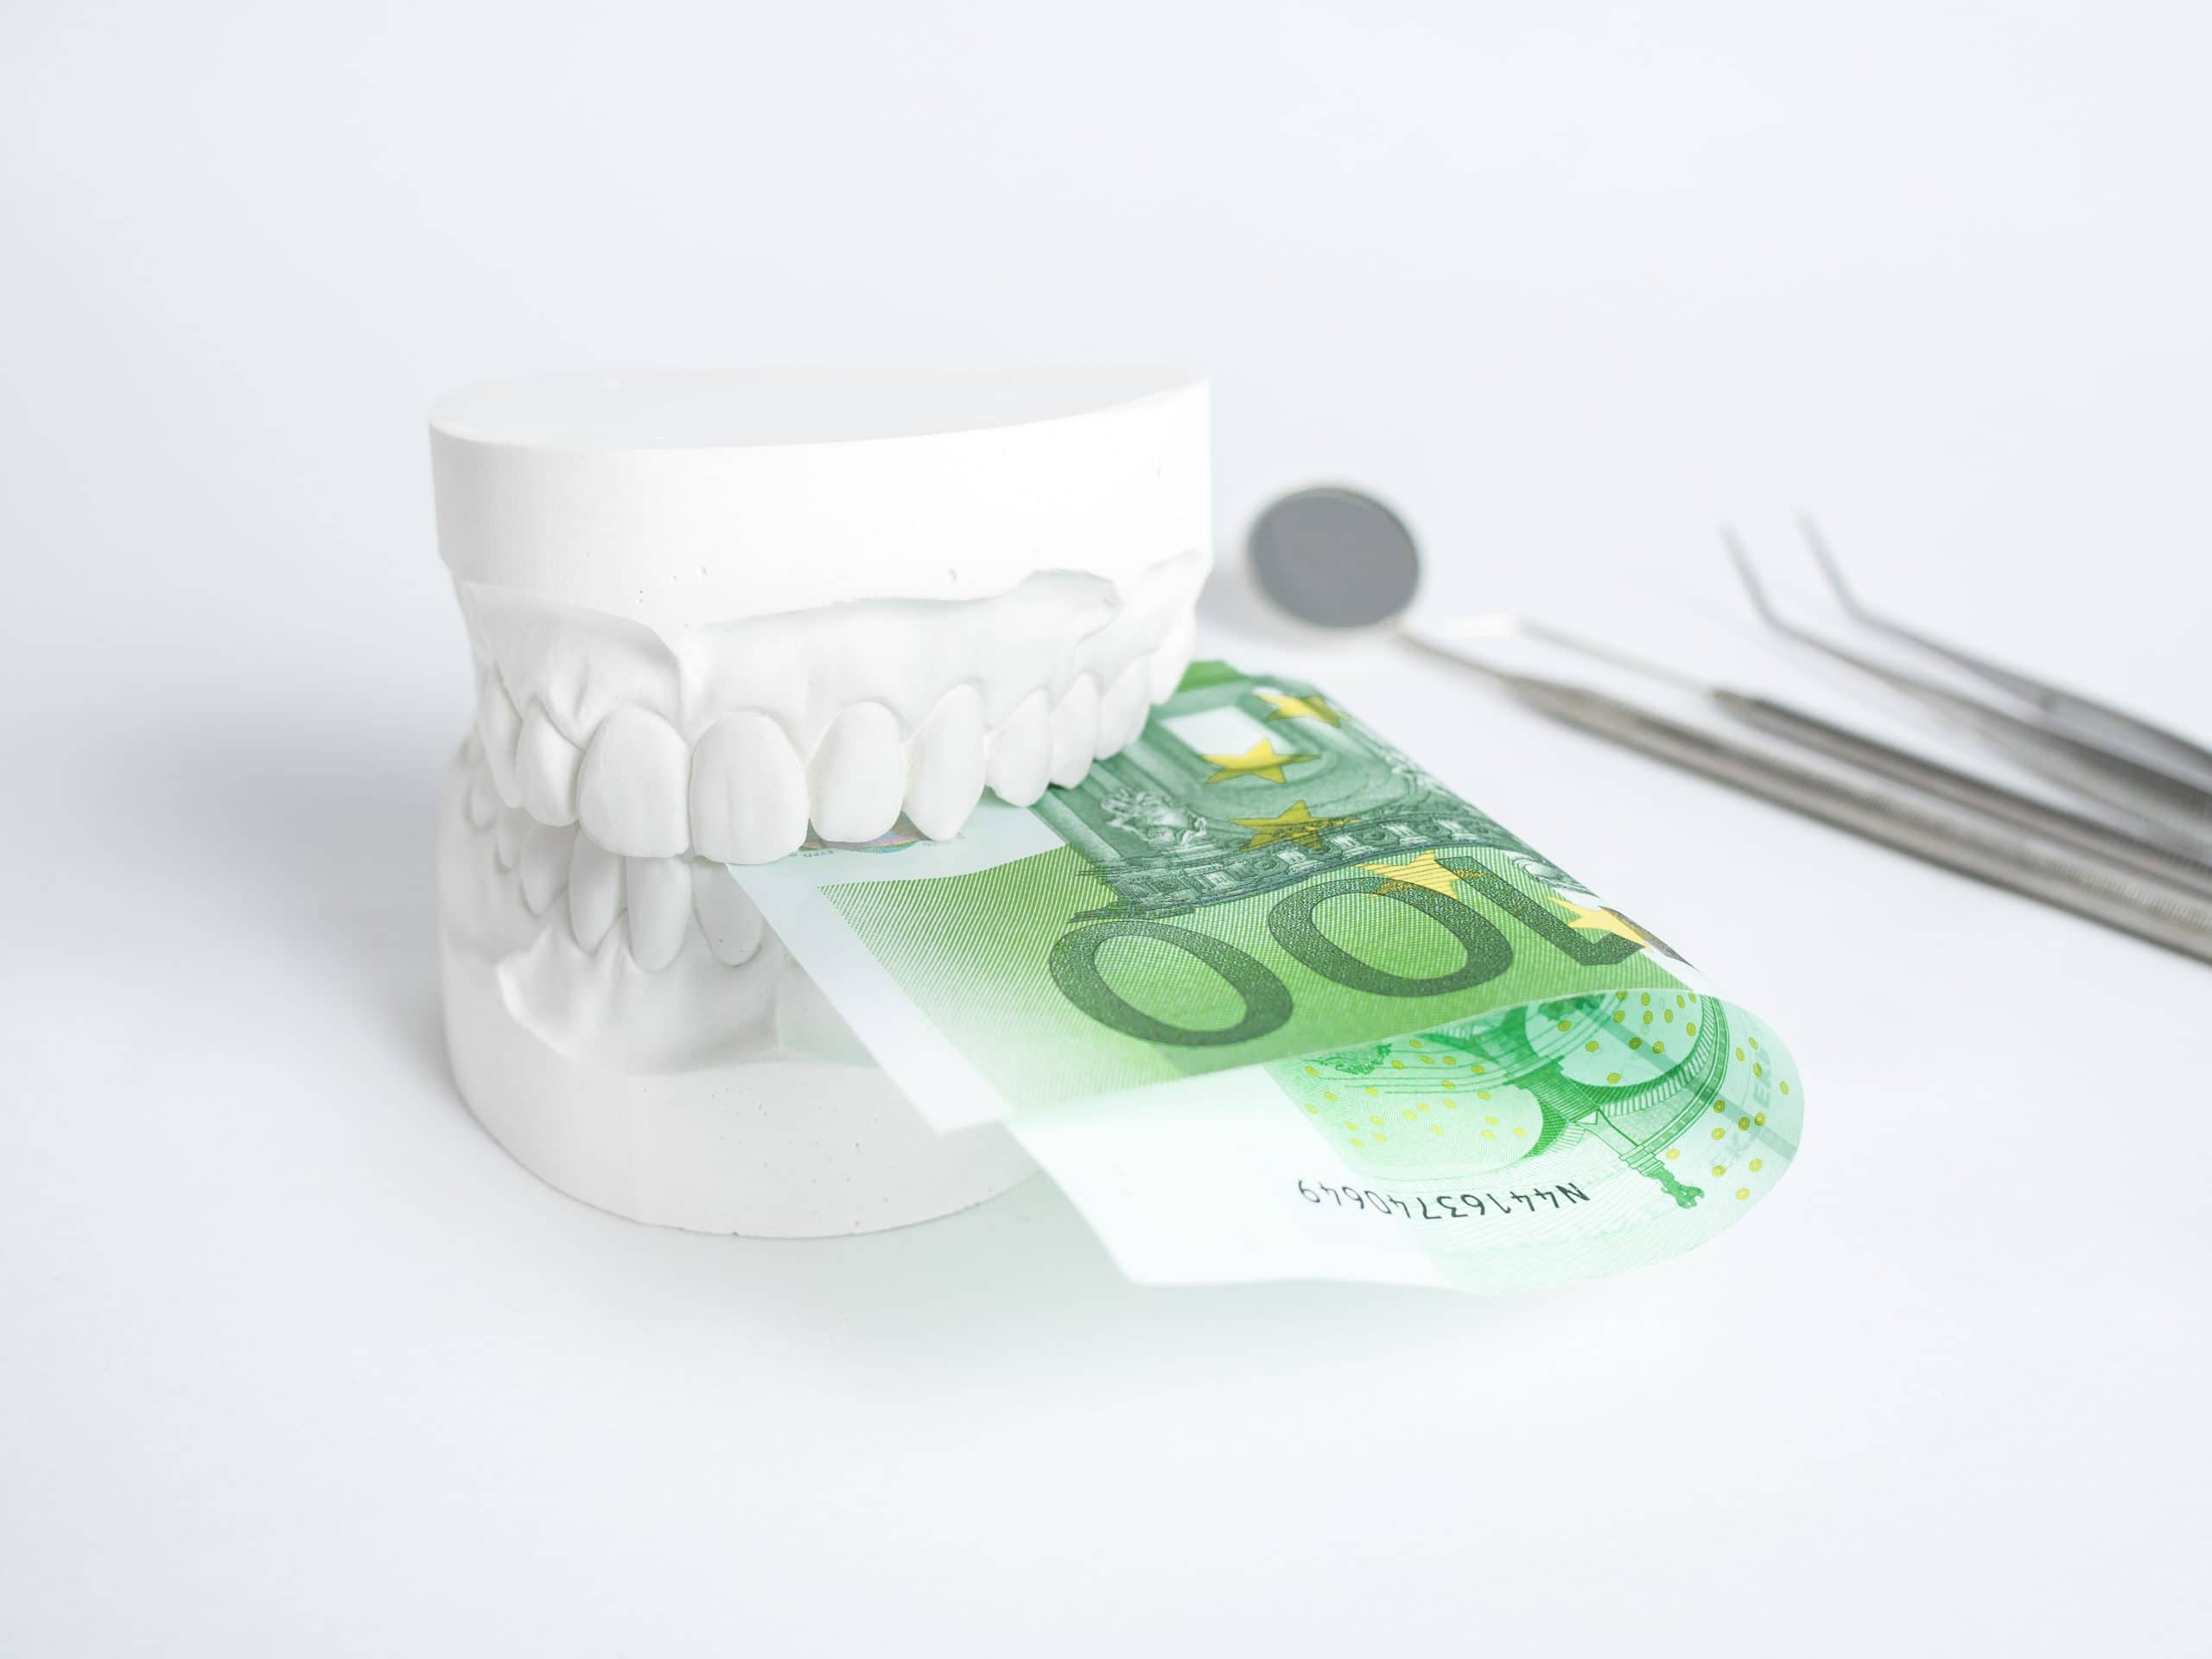 Featured image for “The Cost Of Dentures”